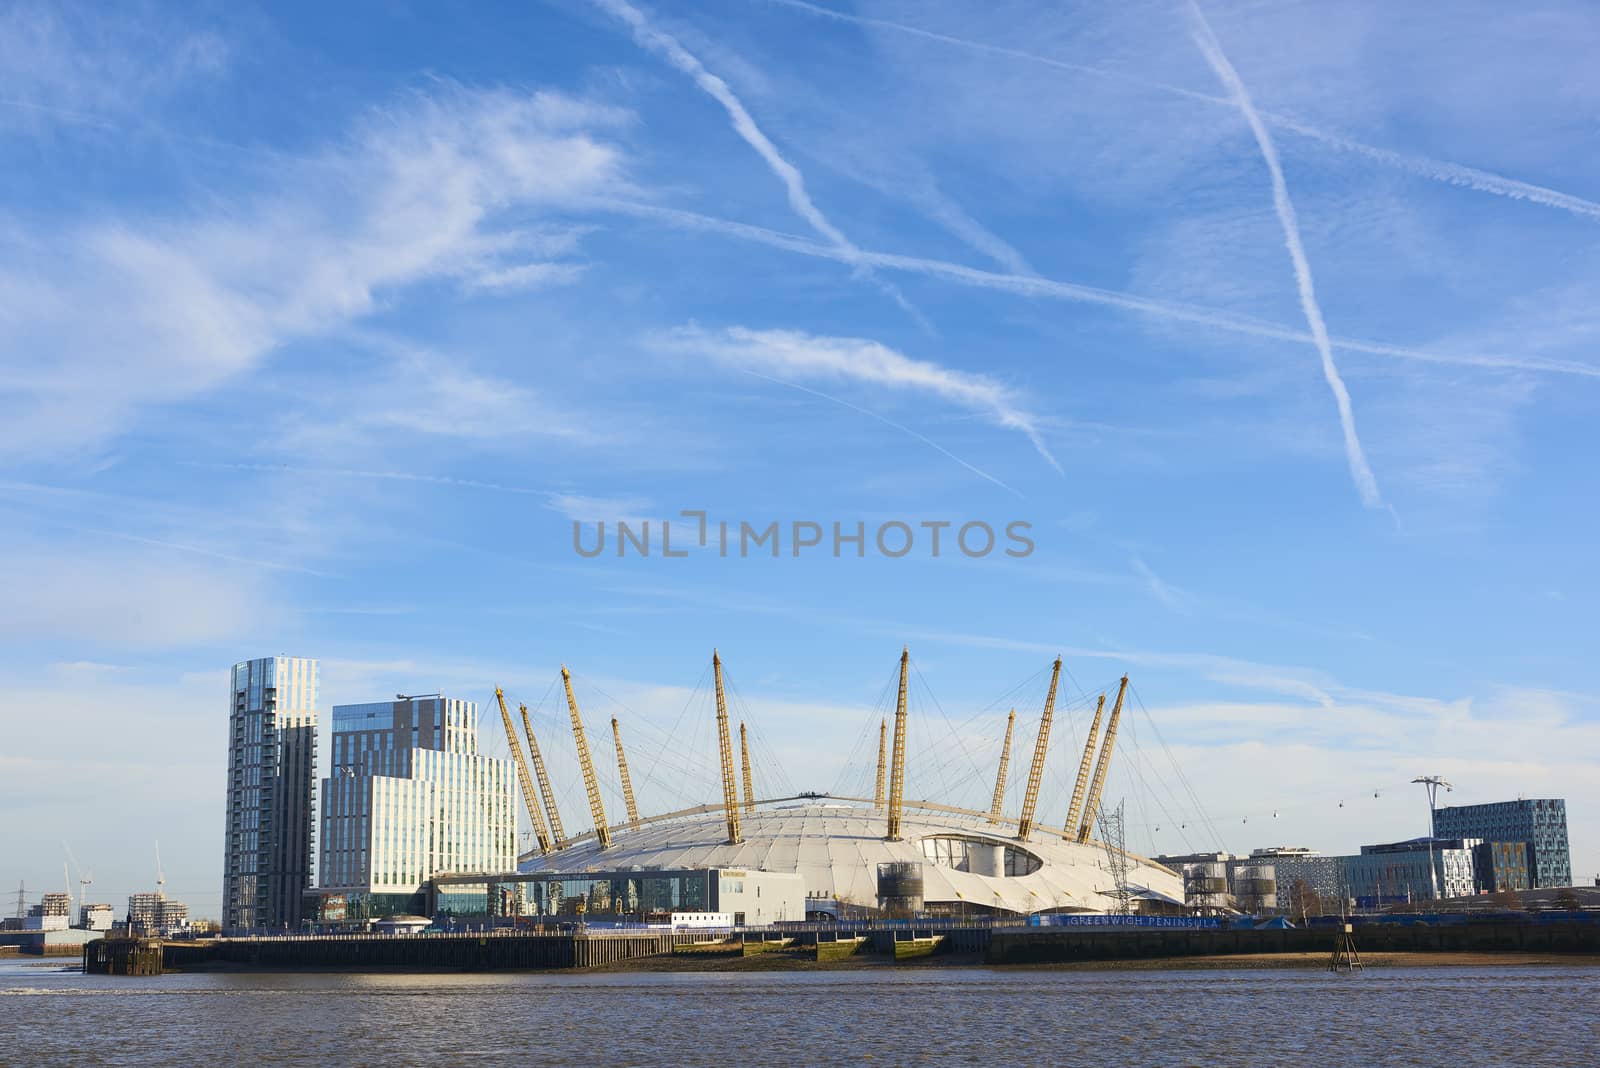 LONDON, UK - DECEMBER 28: The O2 Centre, formerly known as Millennium Dome, in a sunny blue sky day. December 28, 2015 in London.